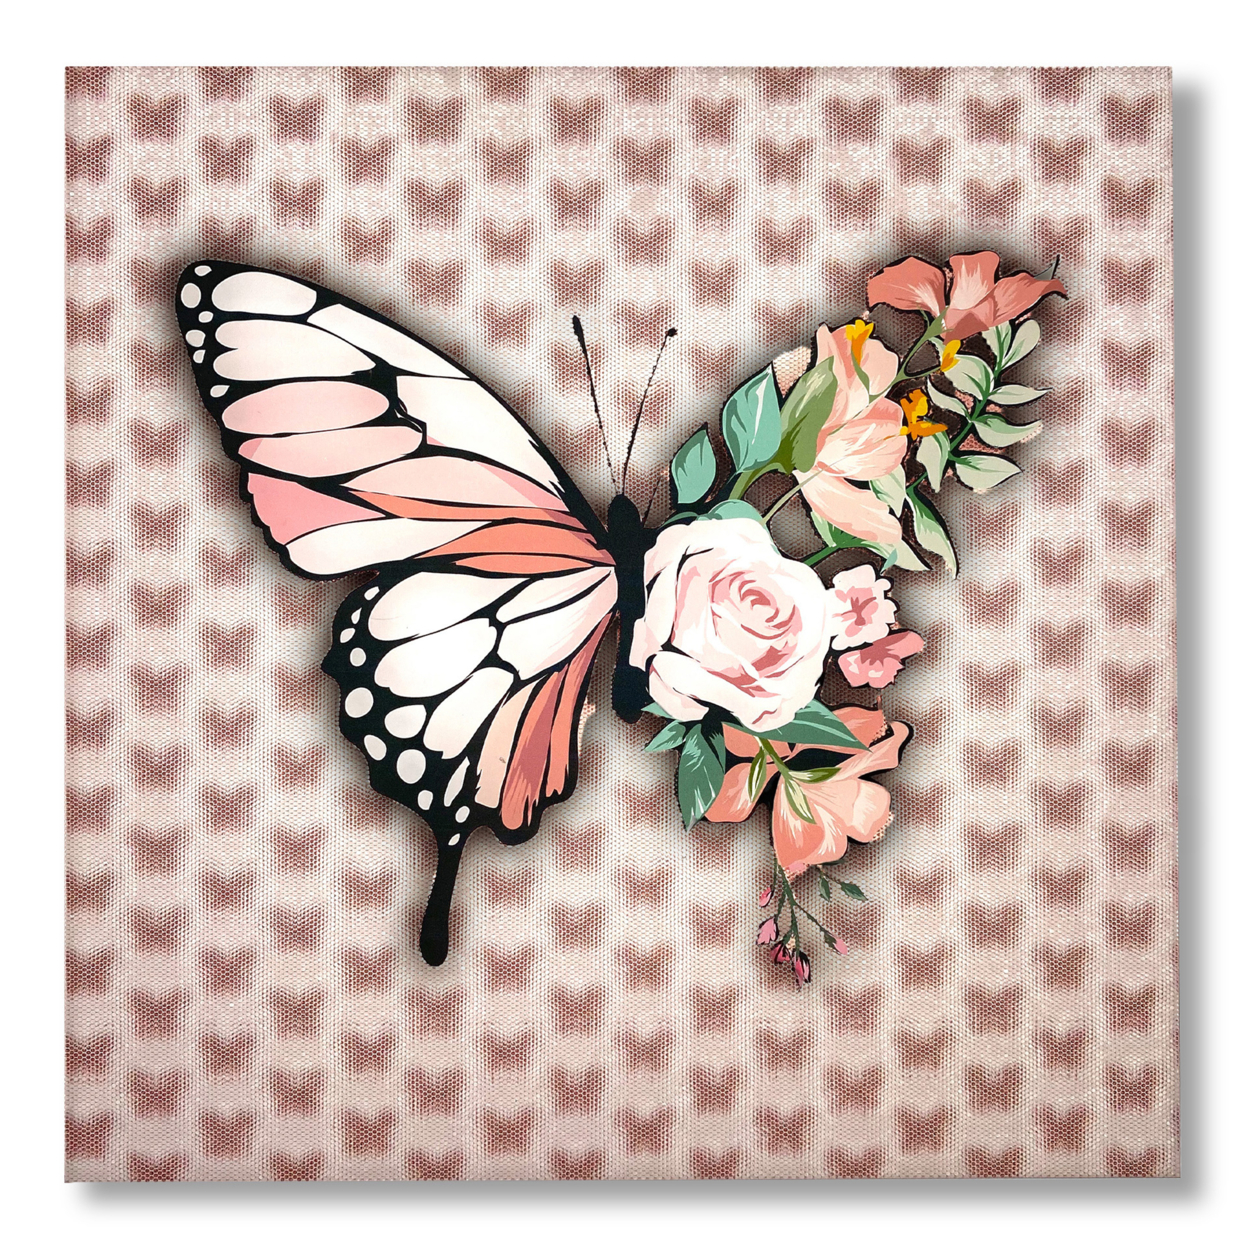 Multi-Dimensional 5D Flower Butterfly Wall Art Print On Strong Polycarbonate Panel W Vibrant Colors -Lenticular Artwork By Matashi (12x12In)